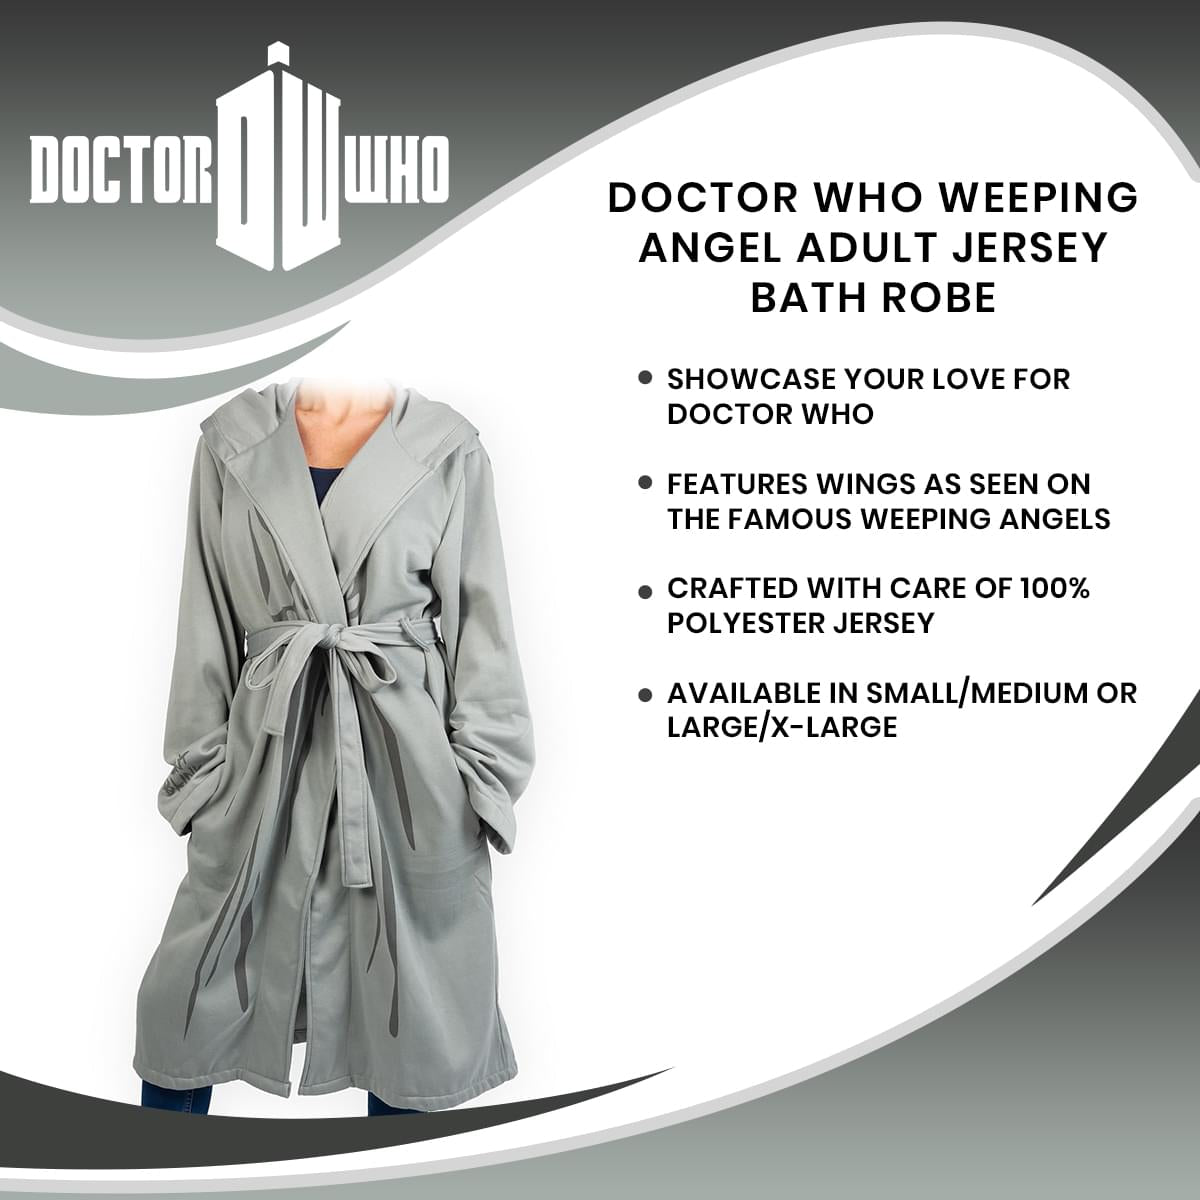 Doctor Who Weeping Angel Adult Jersey Bath Robe